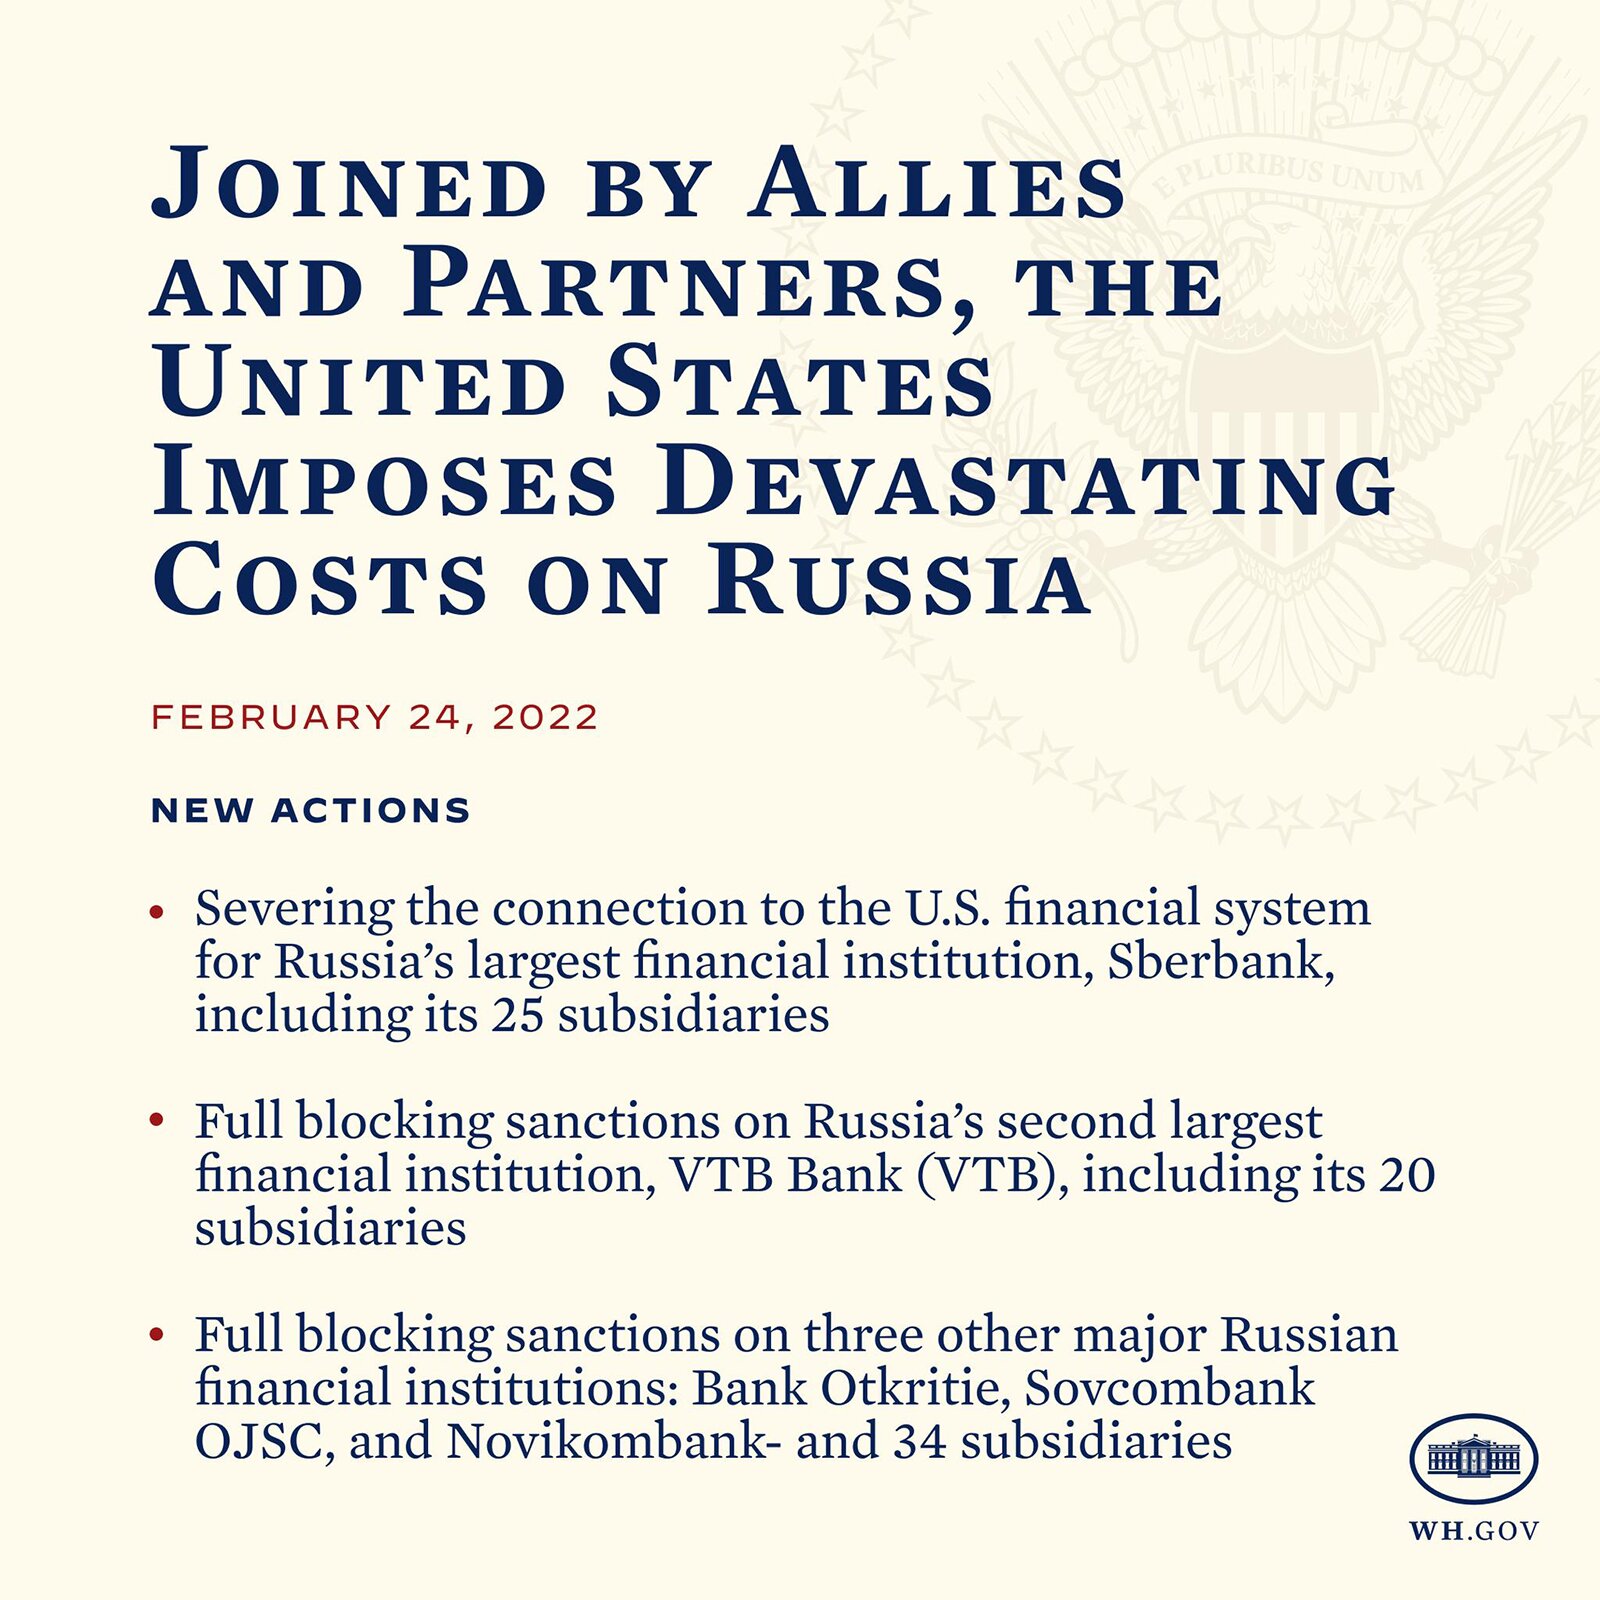 Joined-By-Allies-and-partners-the-United-States-imposes-devastating-costs-on-Russia,-1.jpg